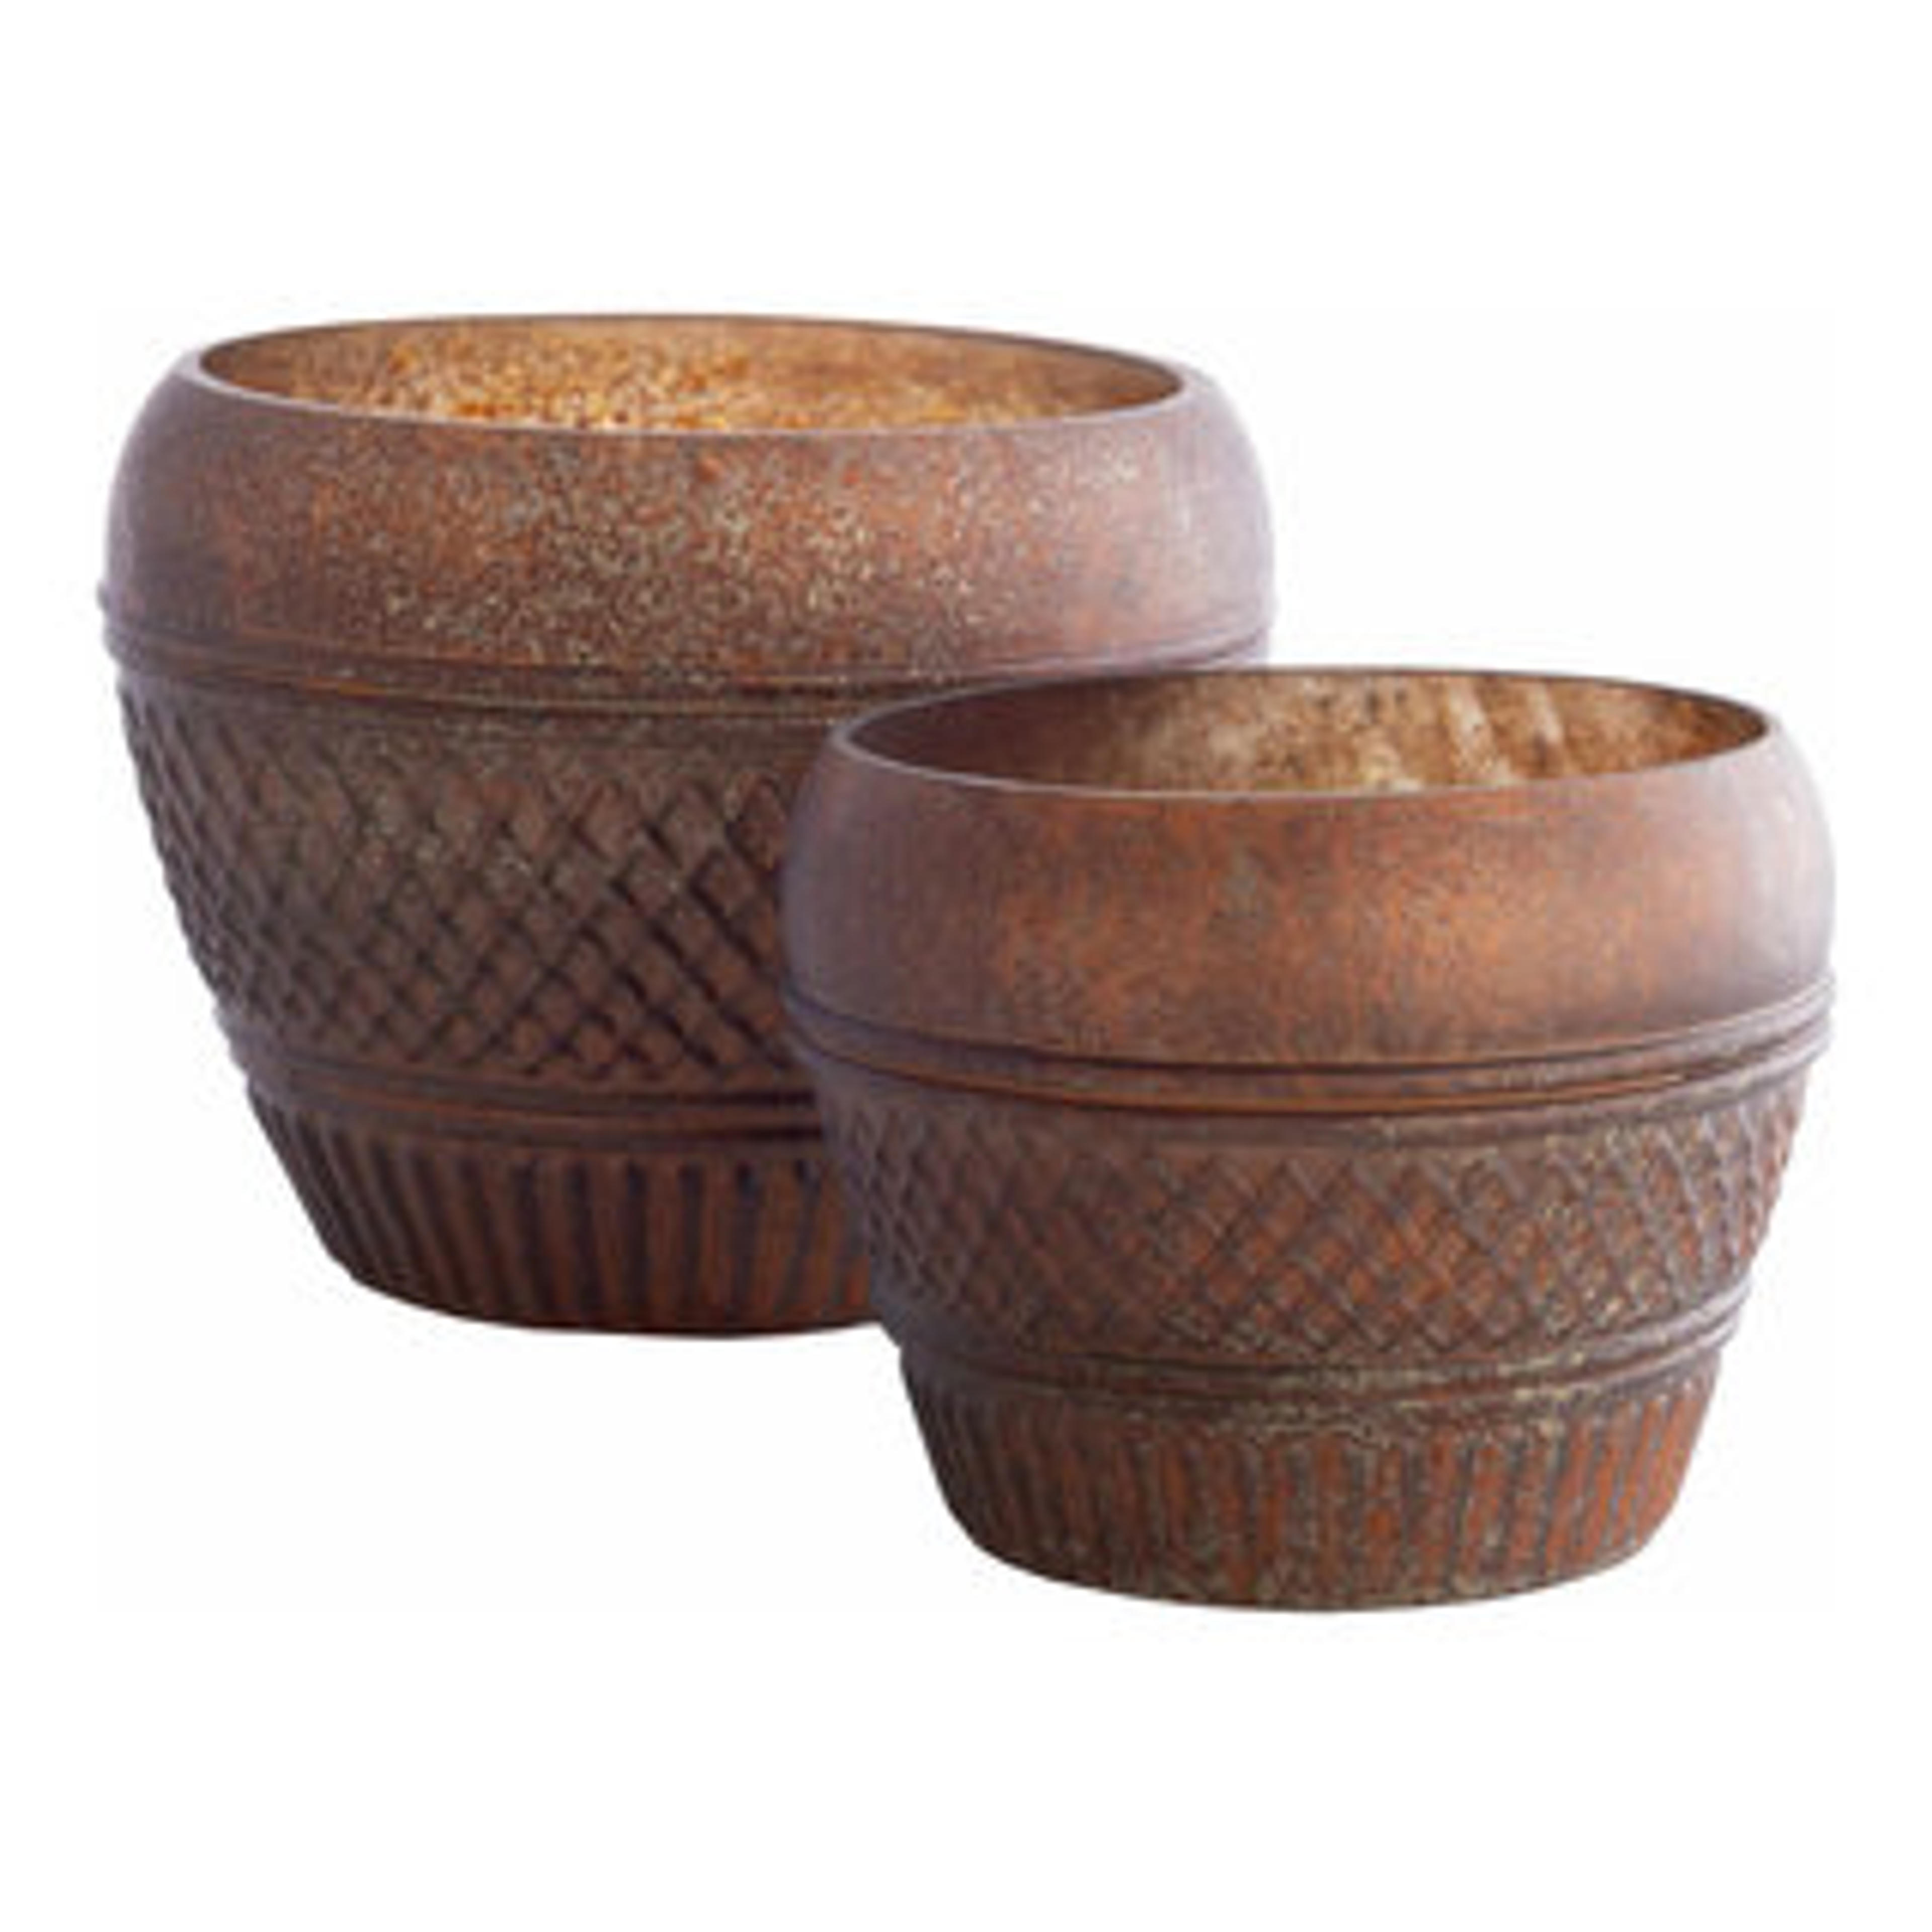 Rissing - Rustic - Indoor Pots And Planters - by Hauteloom | Houzz